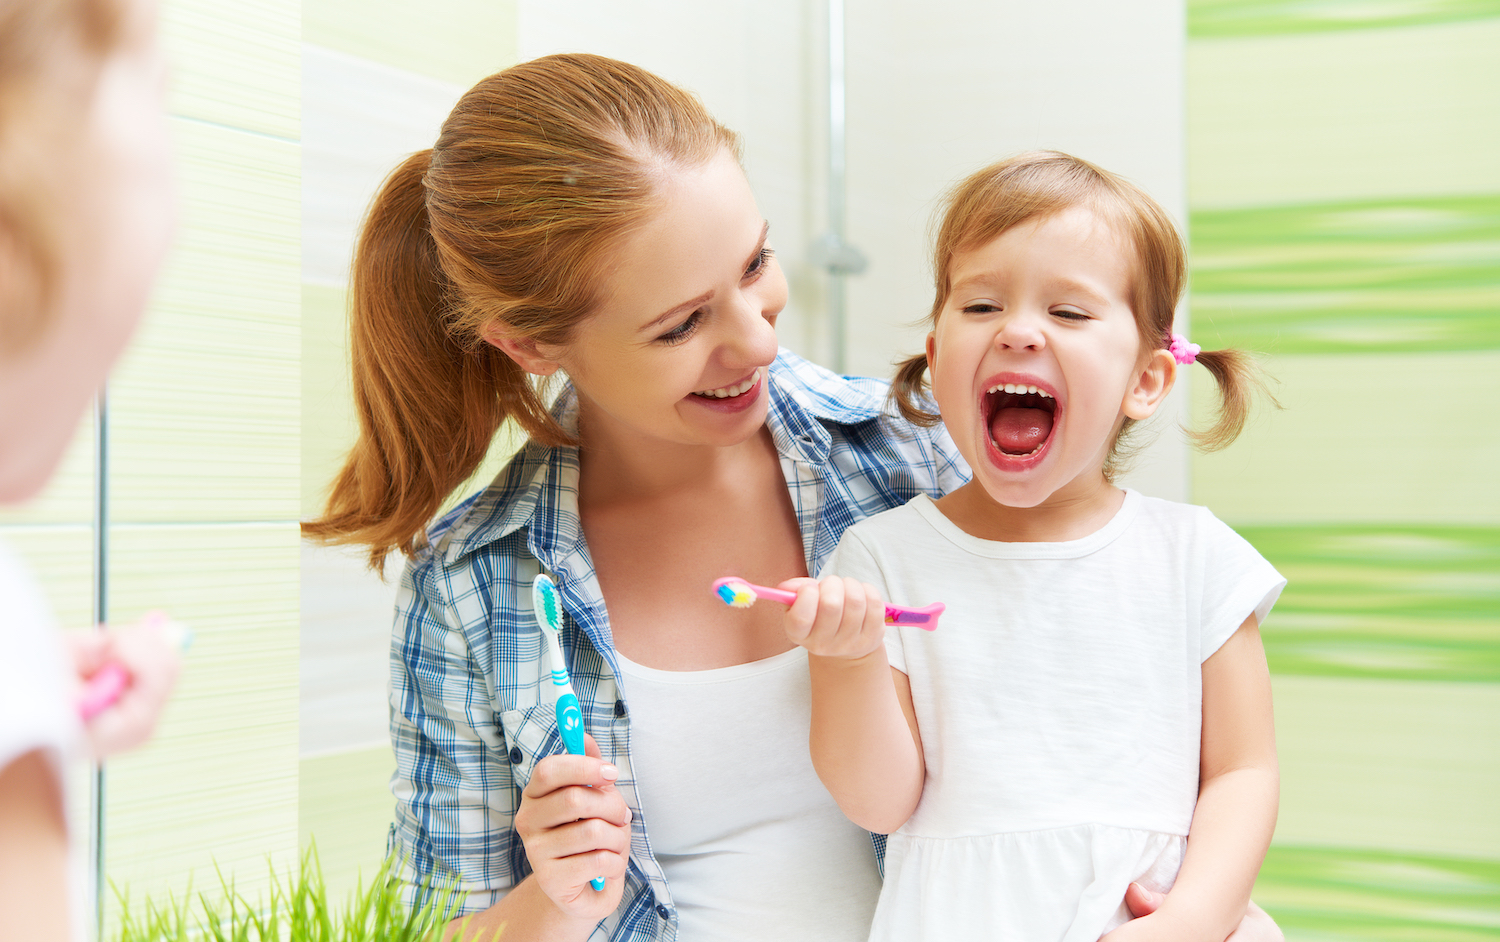 Woman smiles as she looks at her young daughter brushing her teeth in the bathroom